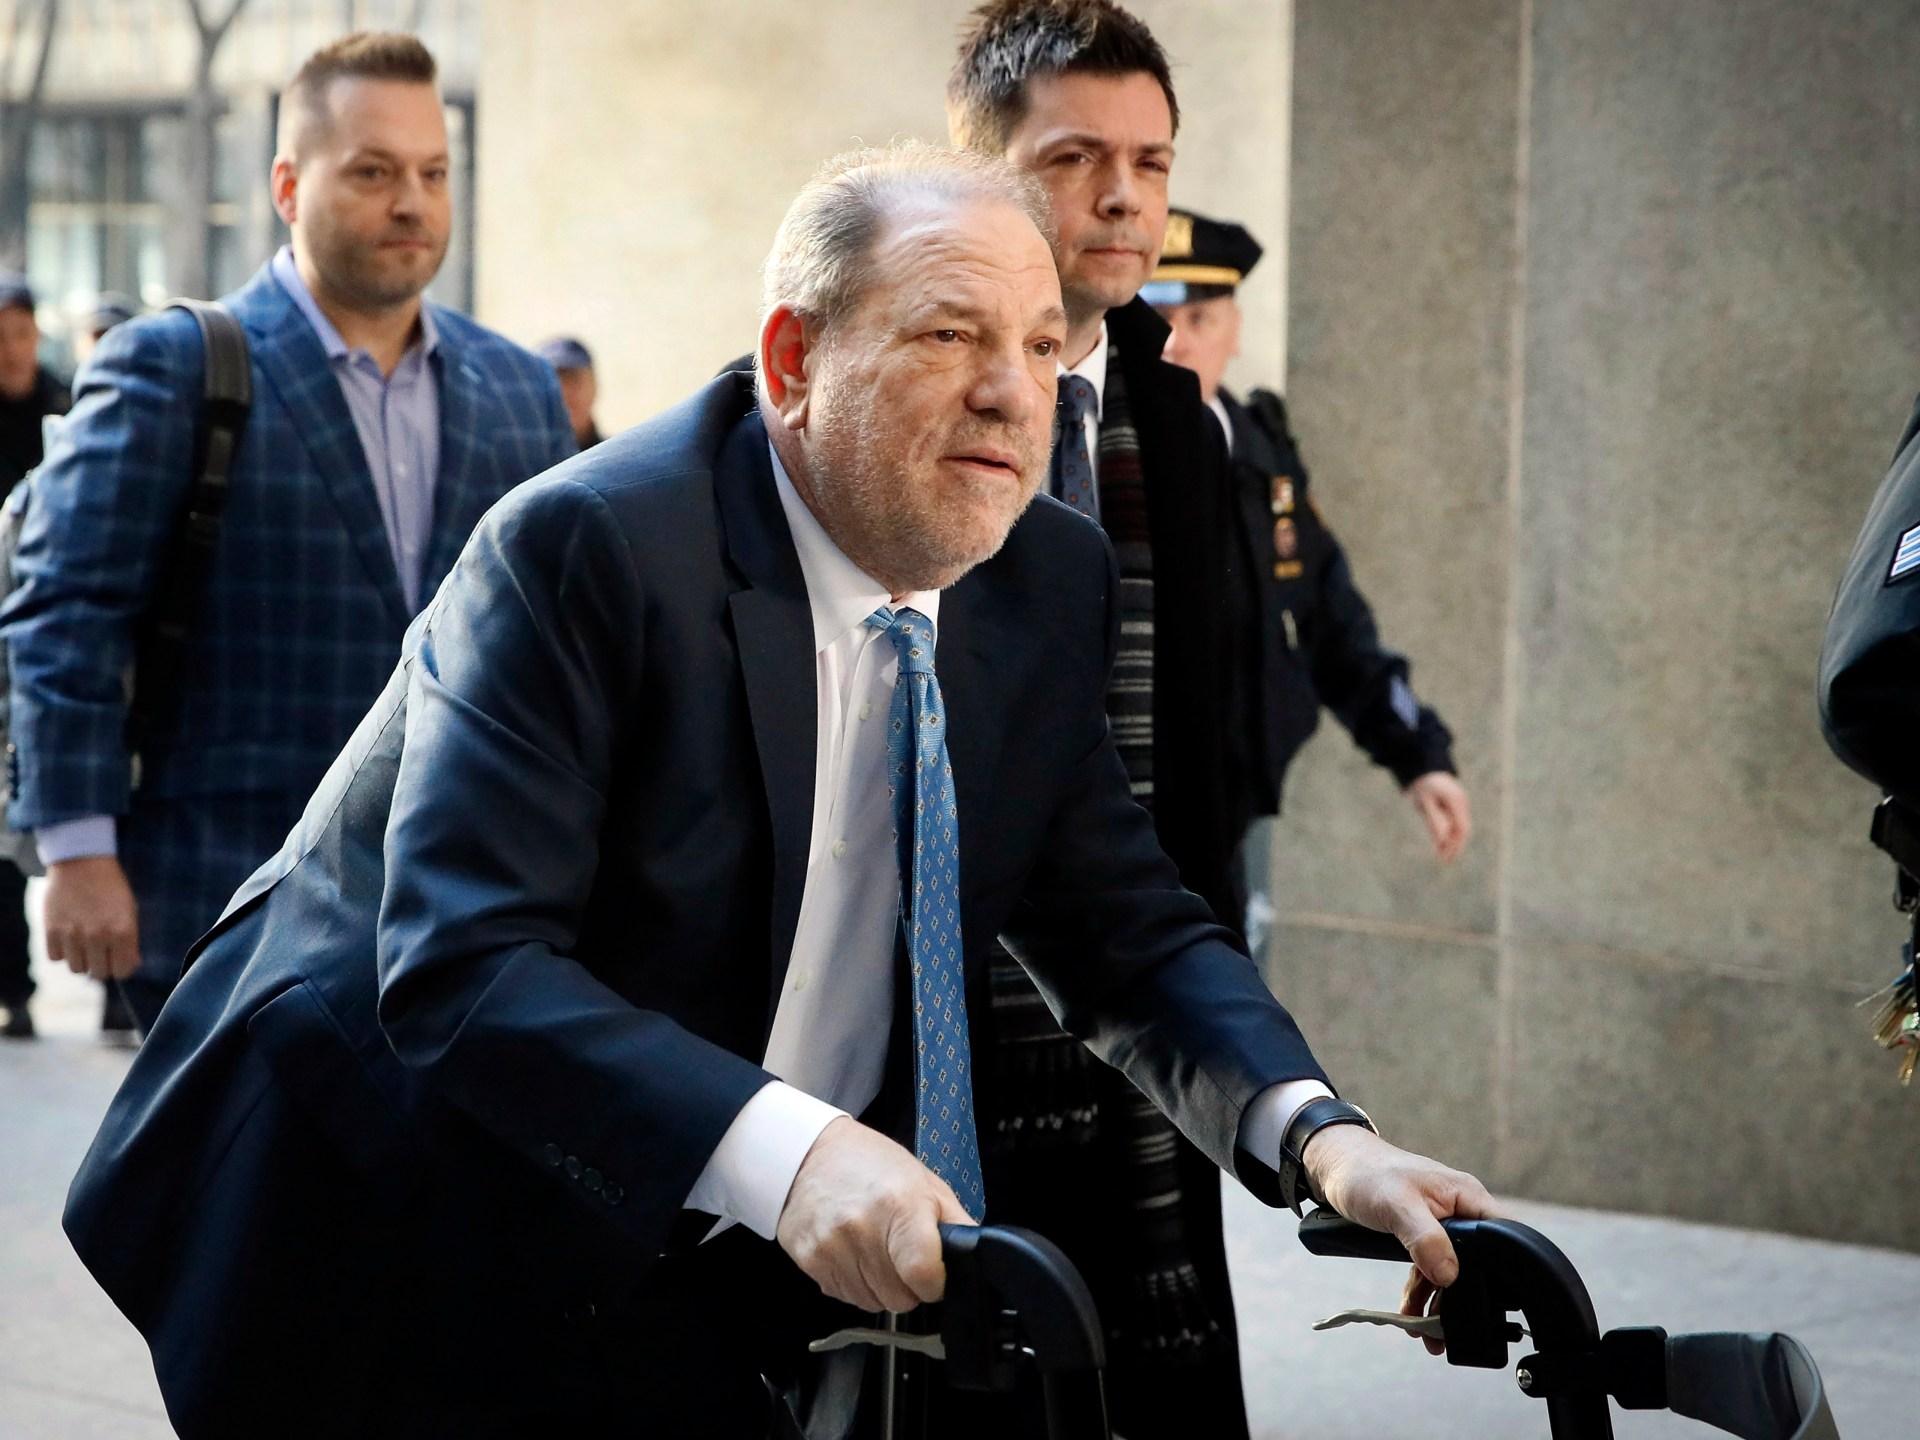 Hollywood producer Harvey Weinstein in hospital after conviction overturned